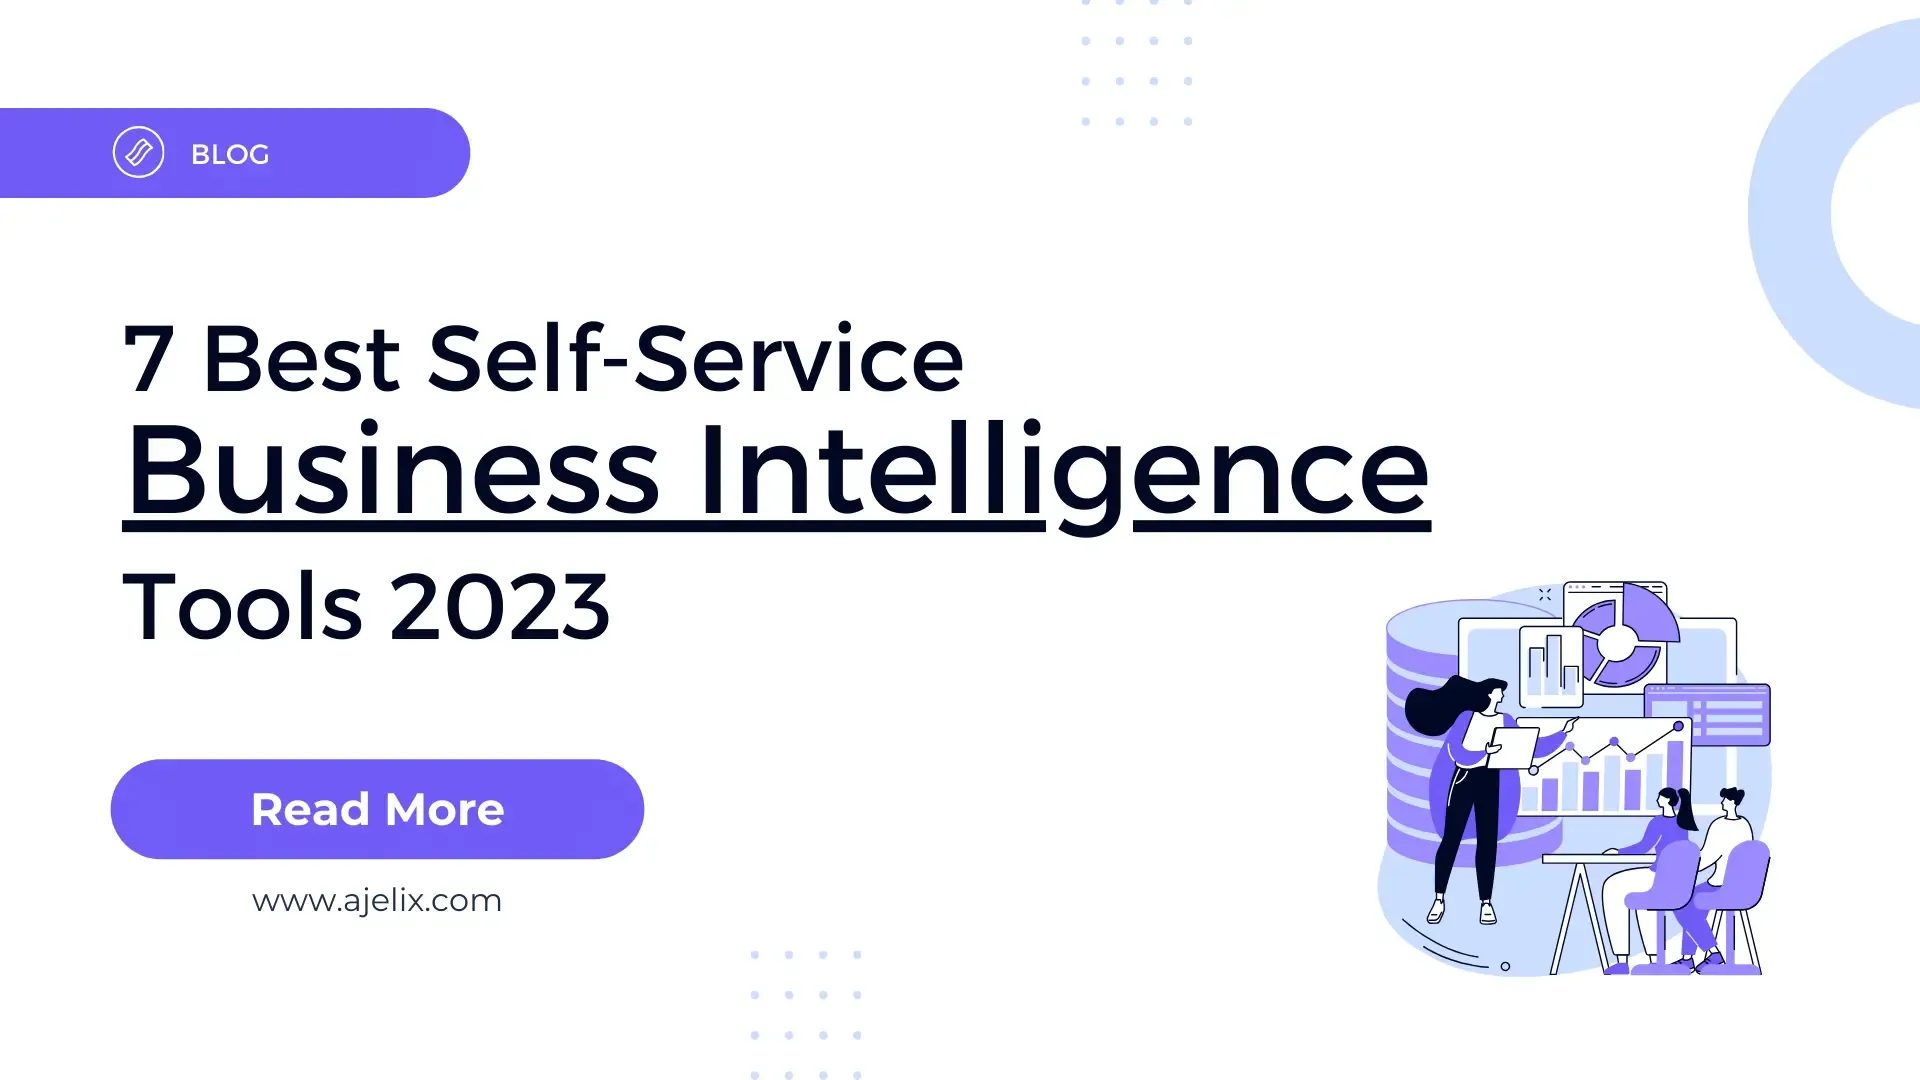 Best self-service business intelligence tools 2023 banner